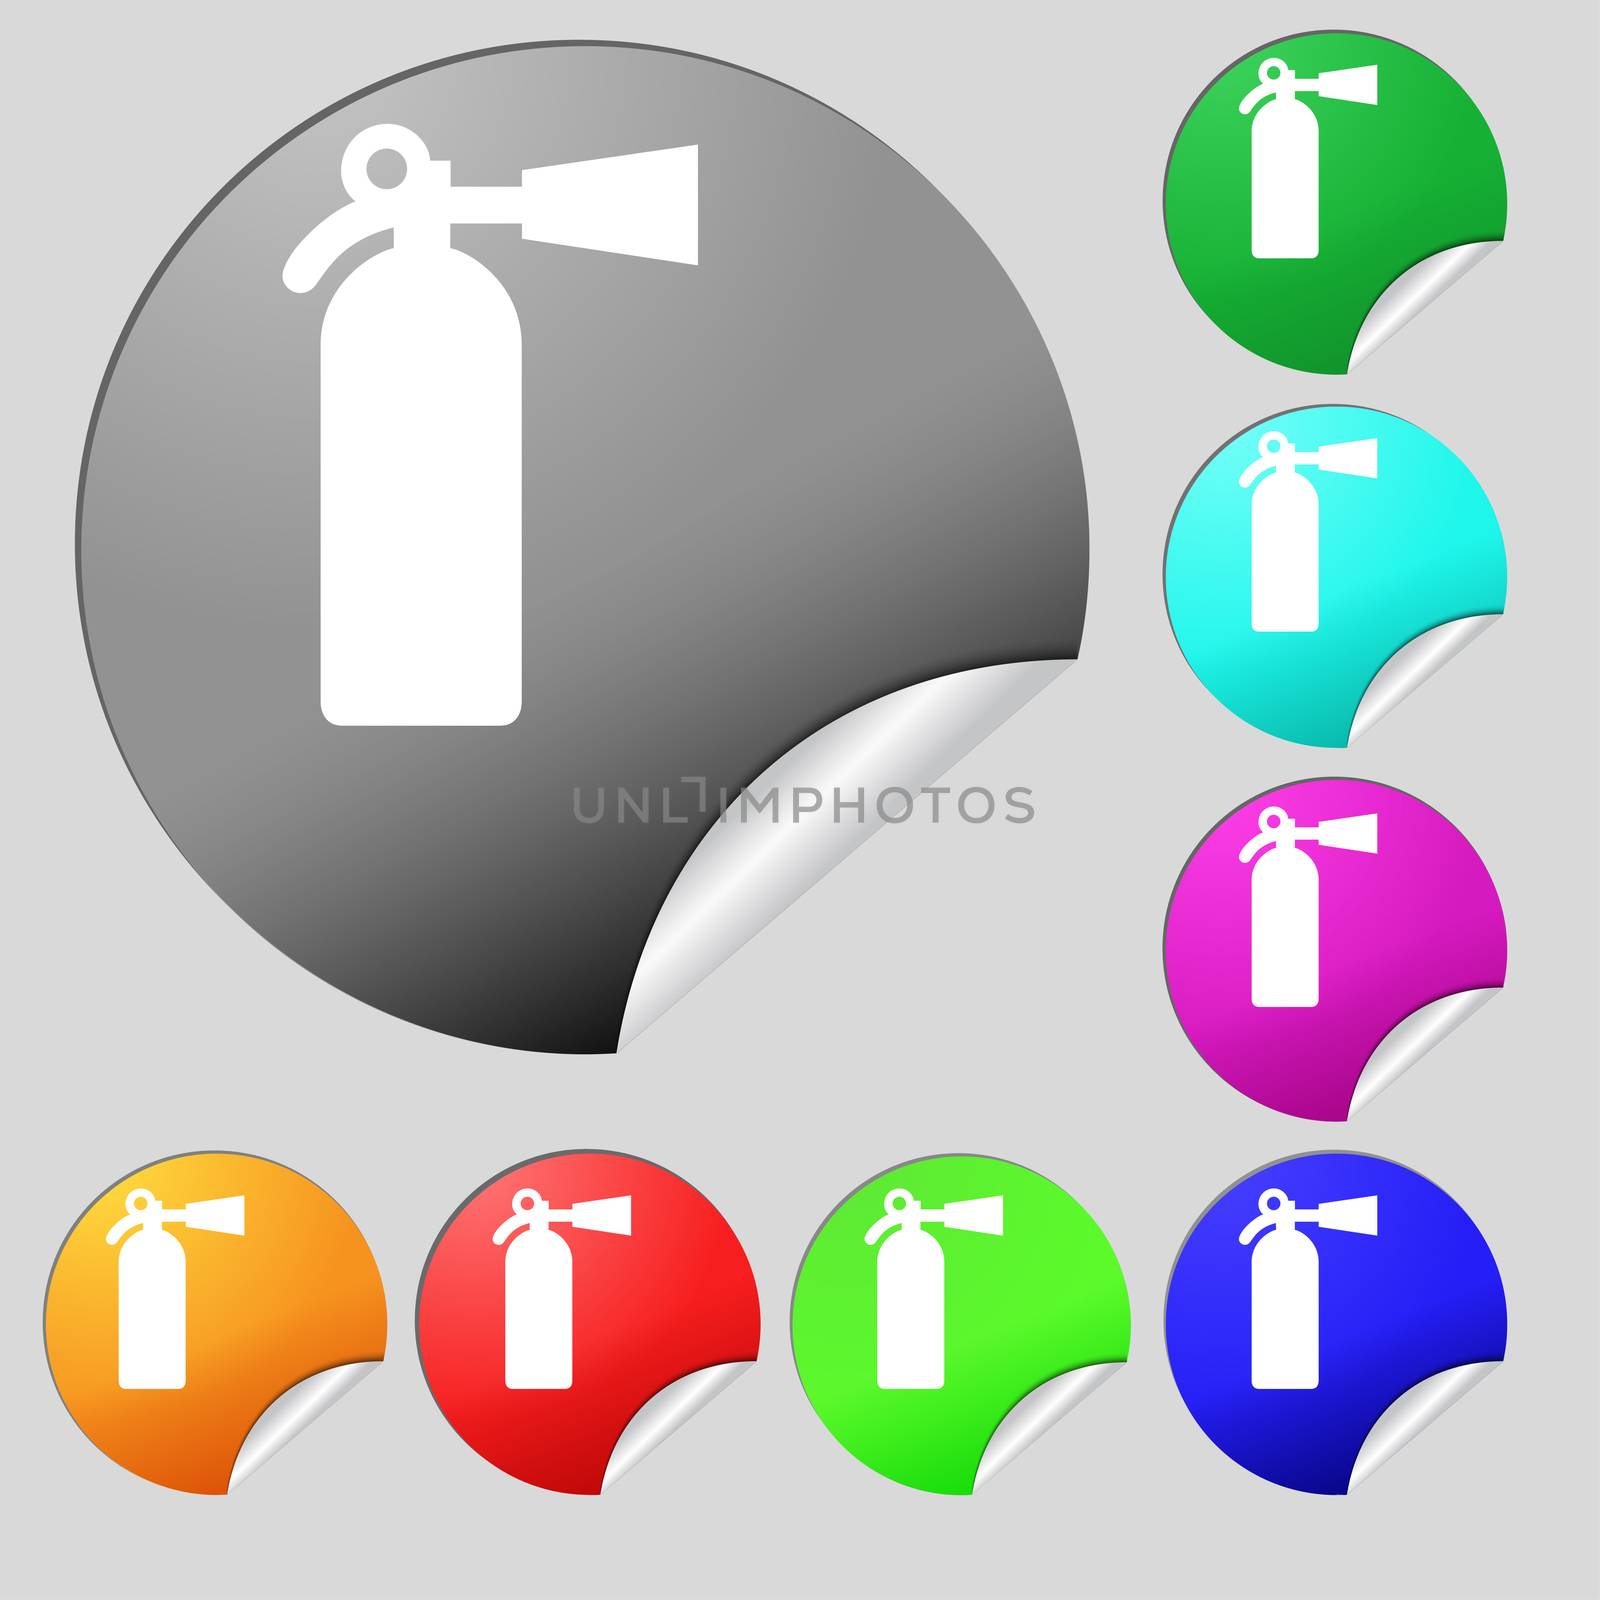 fire extinguisher icon sign. Set of eight multi colored round buttons, stickers. illustration